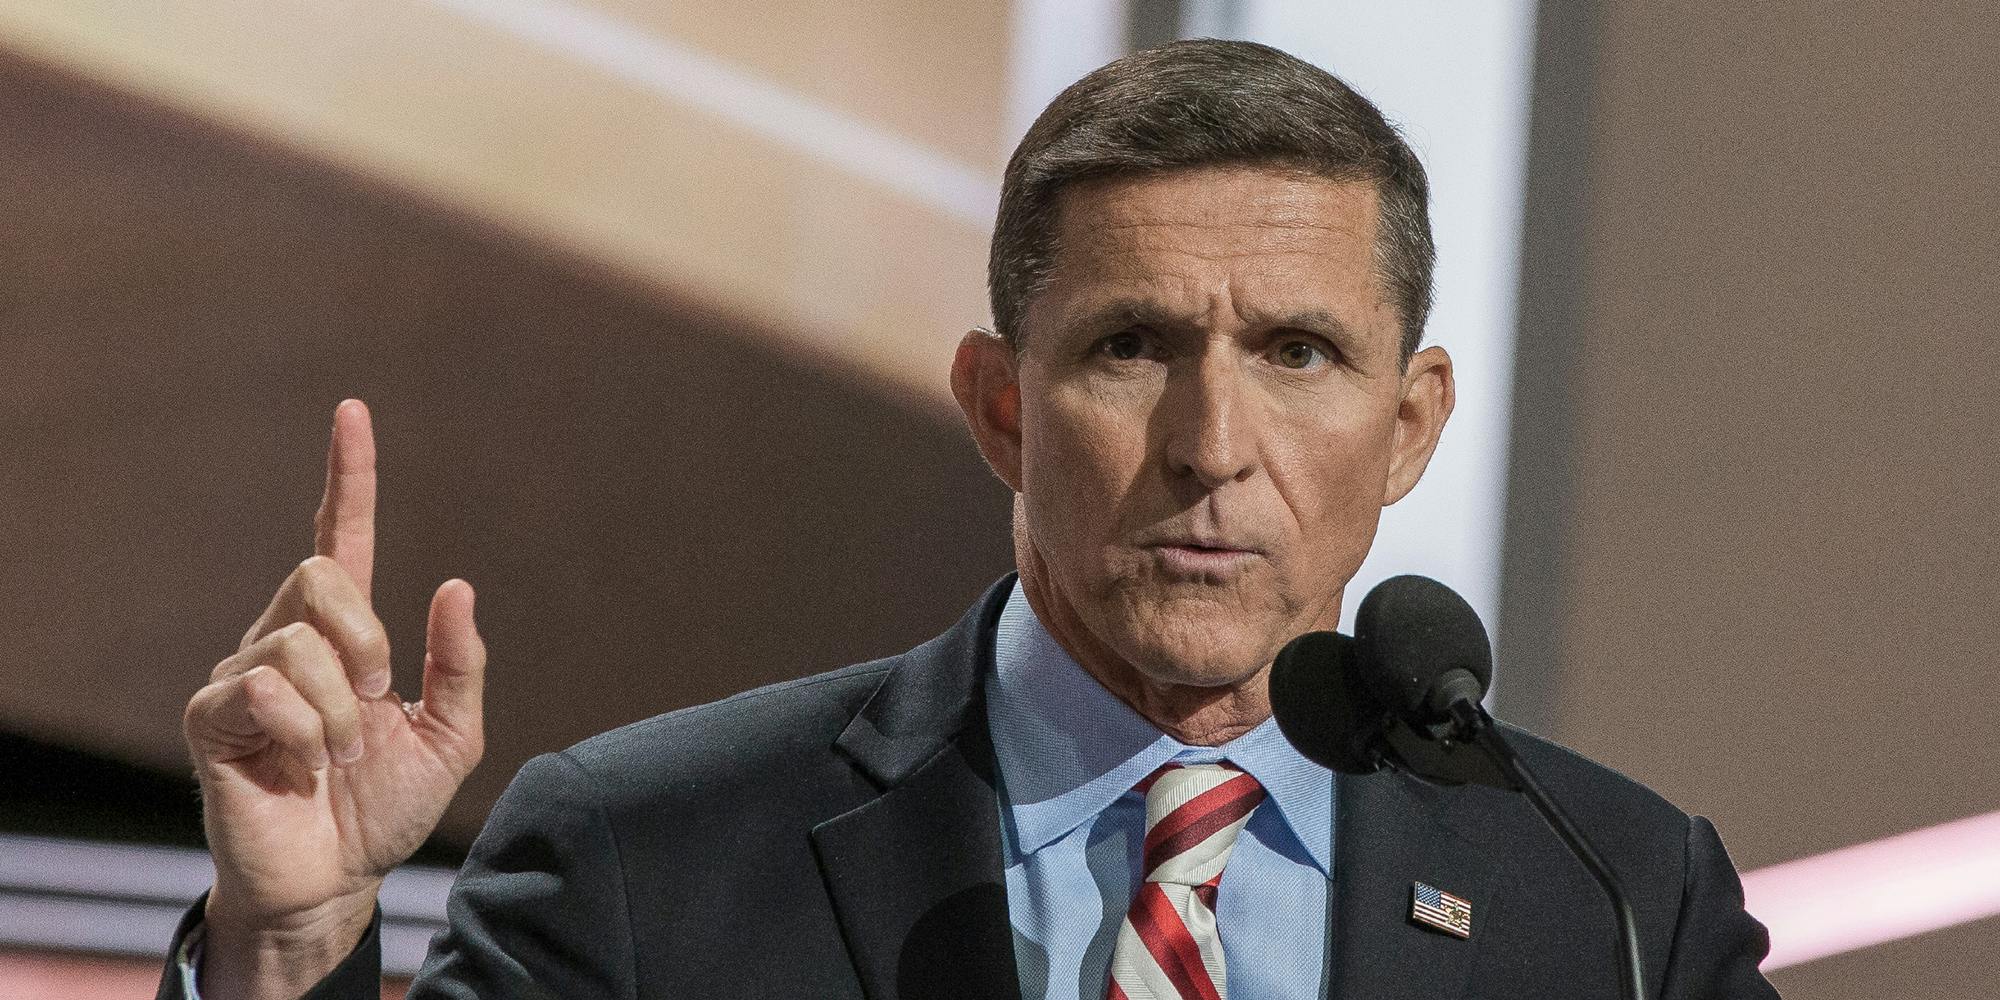 Michael Flynn pointing with his hand.